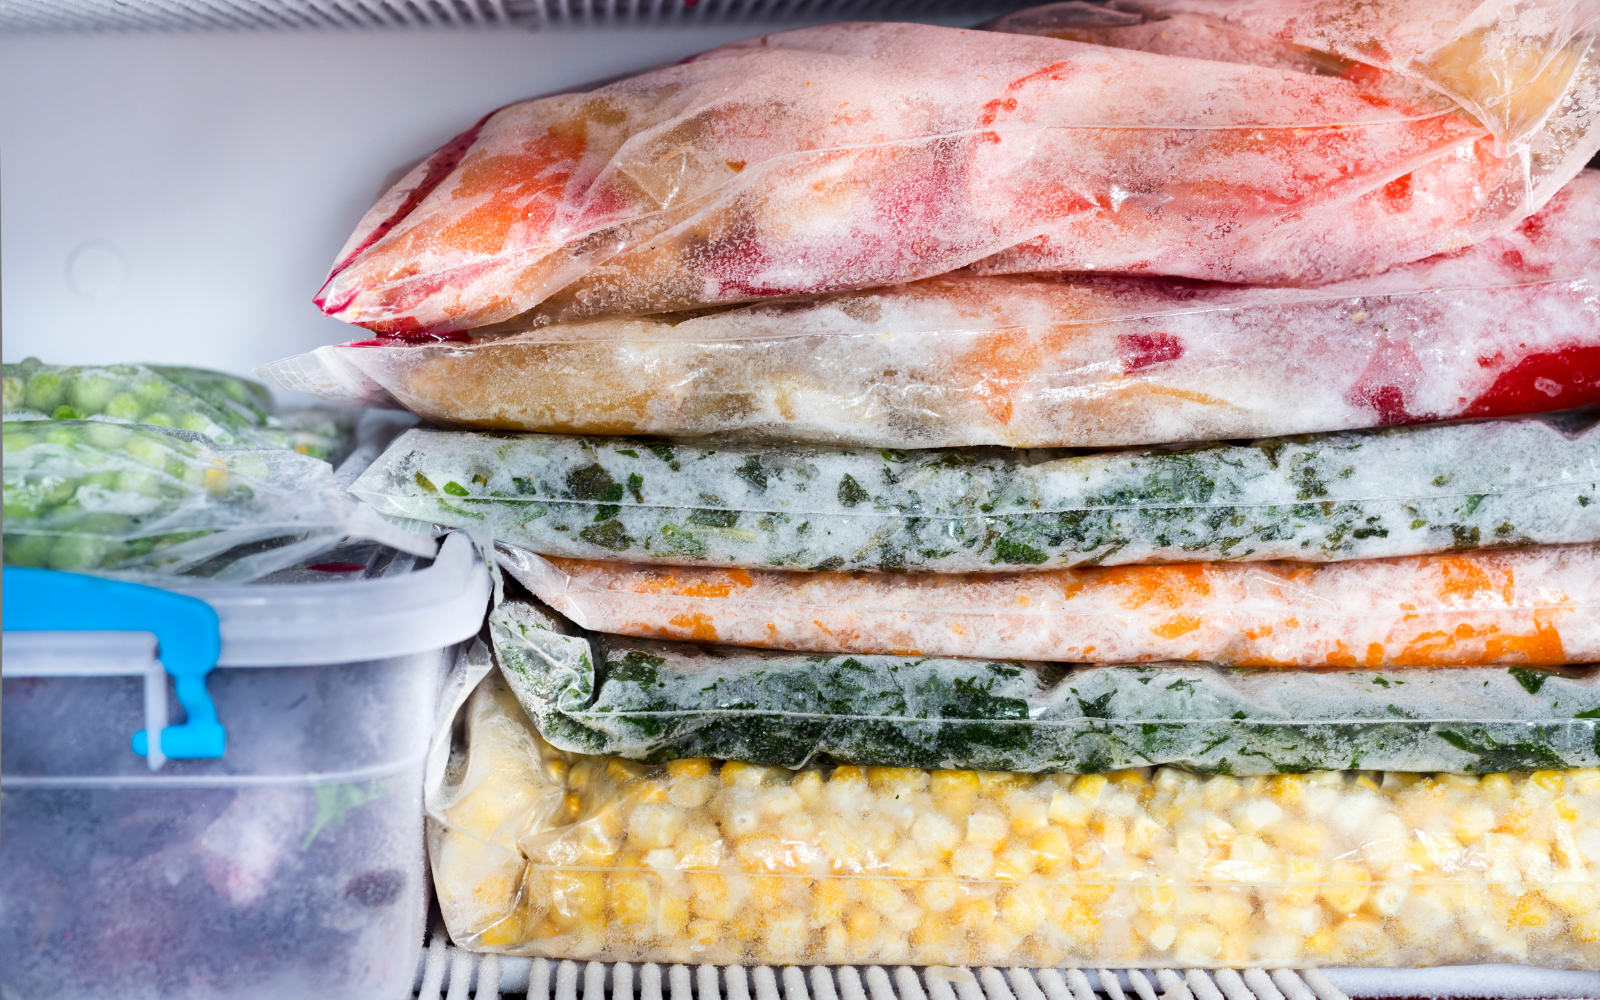 Between school, extracurriculars, and sickness, people are busy. This is where freezer meals can really help. Written by Jennifer Neale, Registered Dietitian, Certified Intuitive Eating Counsellor, and owner of Nutrition IQ in Ottawa Ontario.